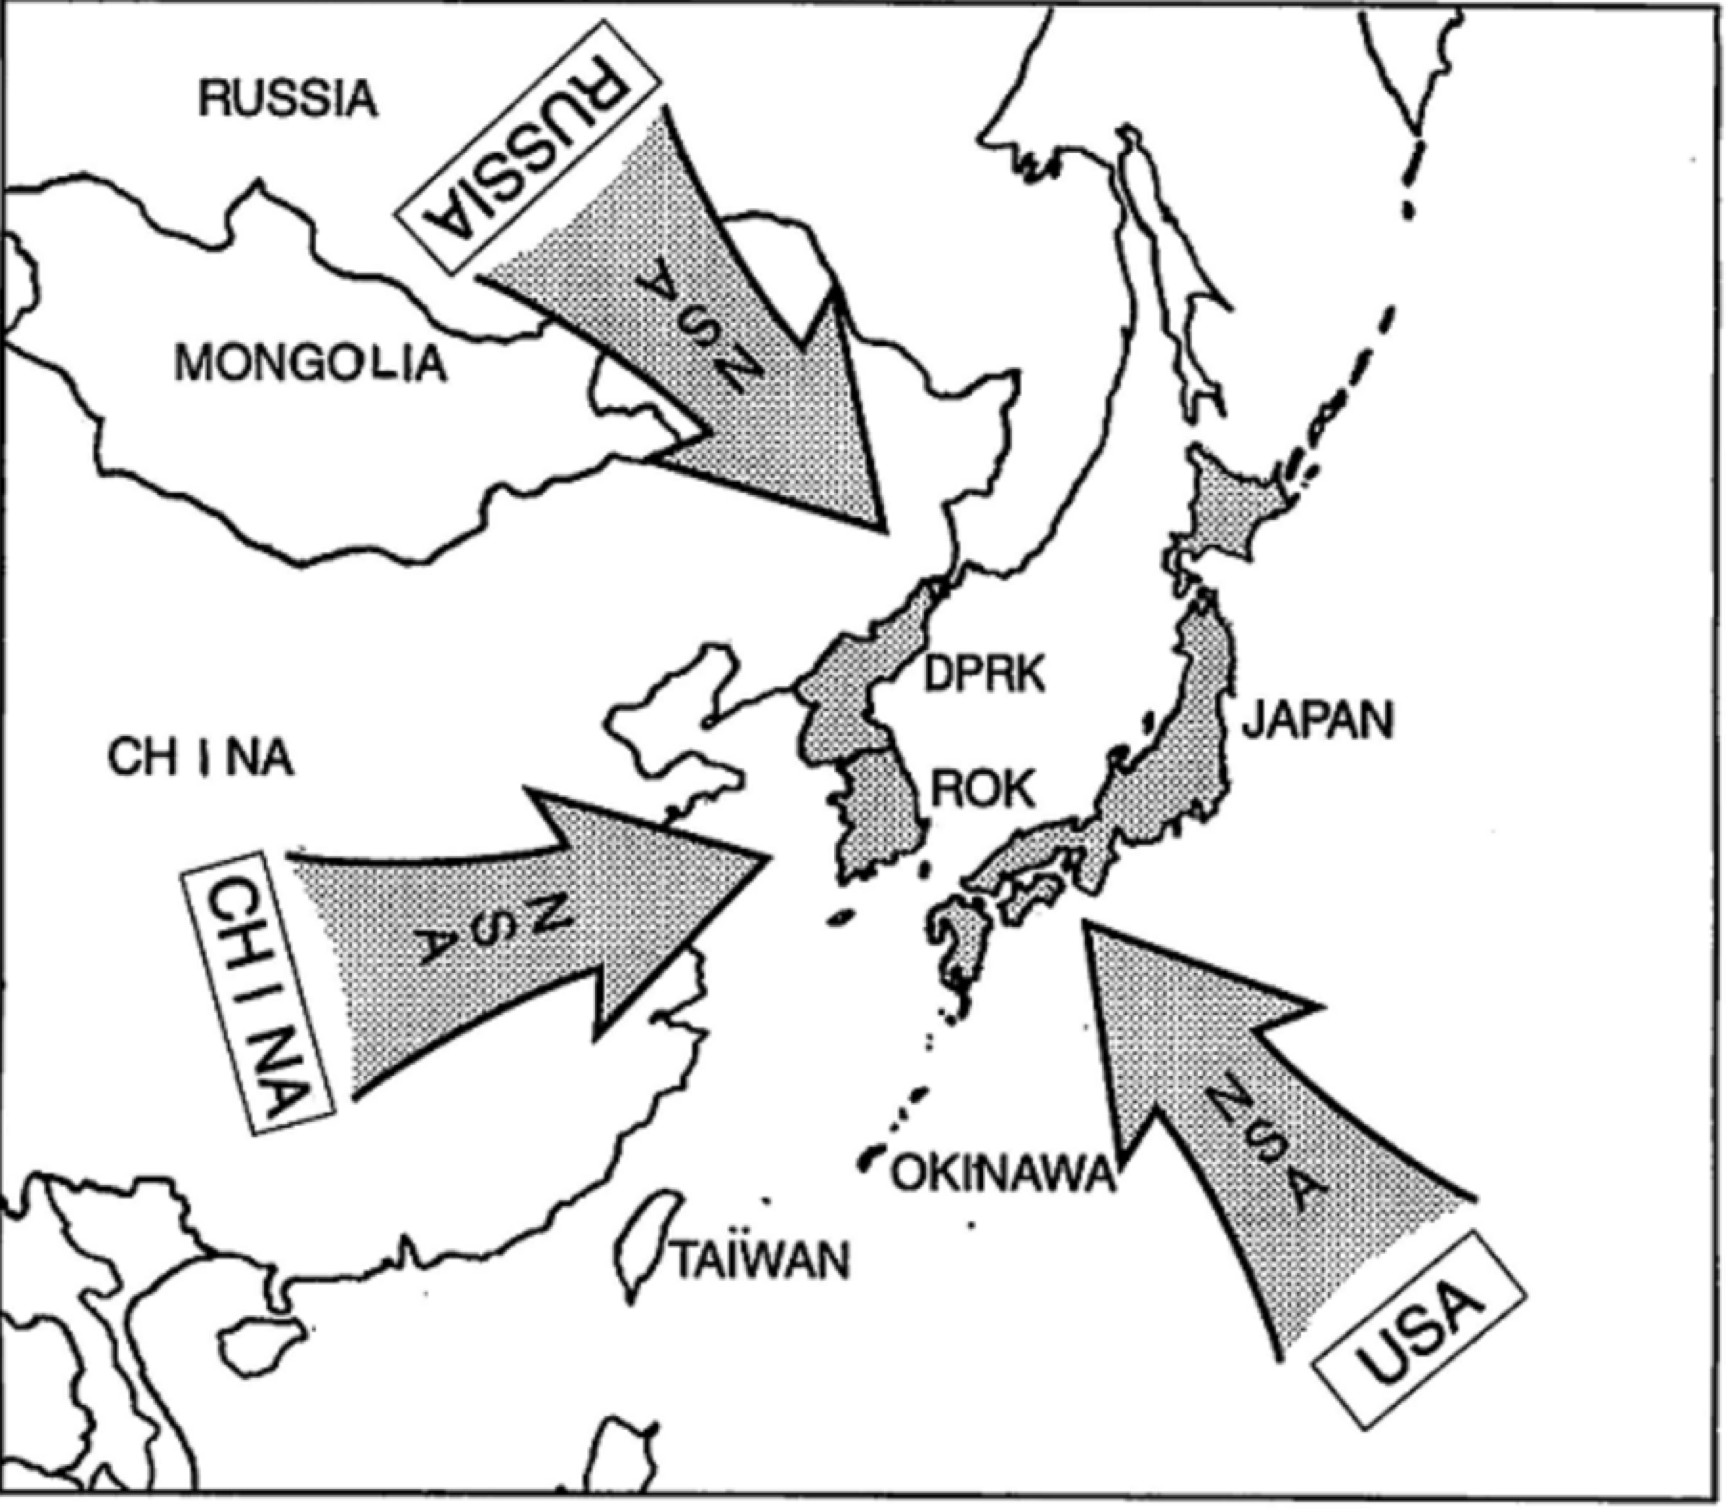 It S Time For A Nuclear Weapon Free Northeast Asia By Tadashi Inuzuka May 21 Medium